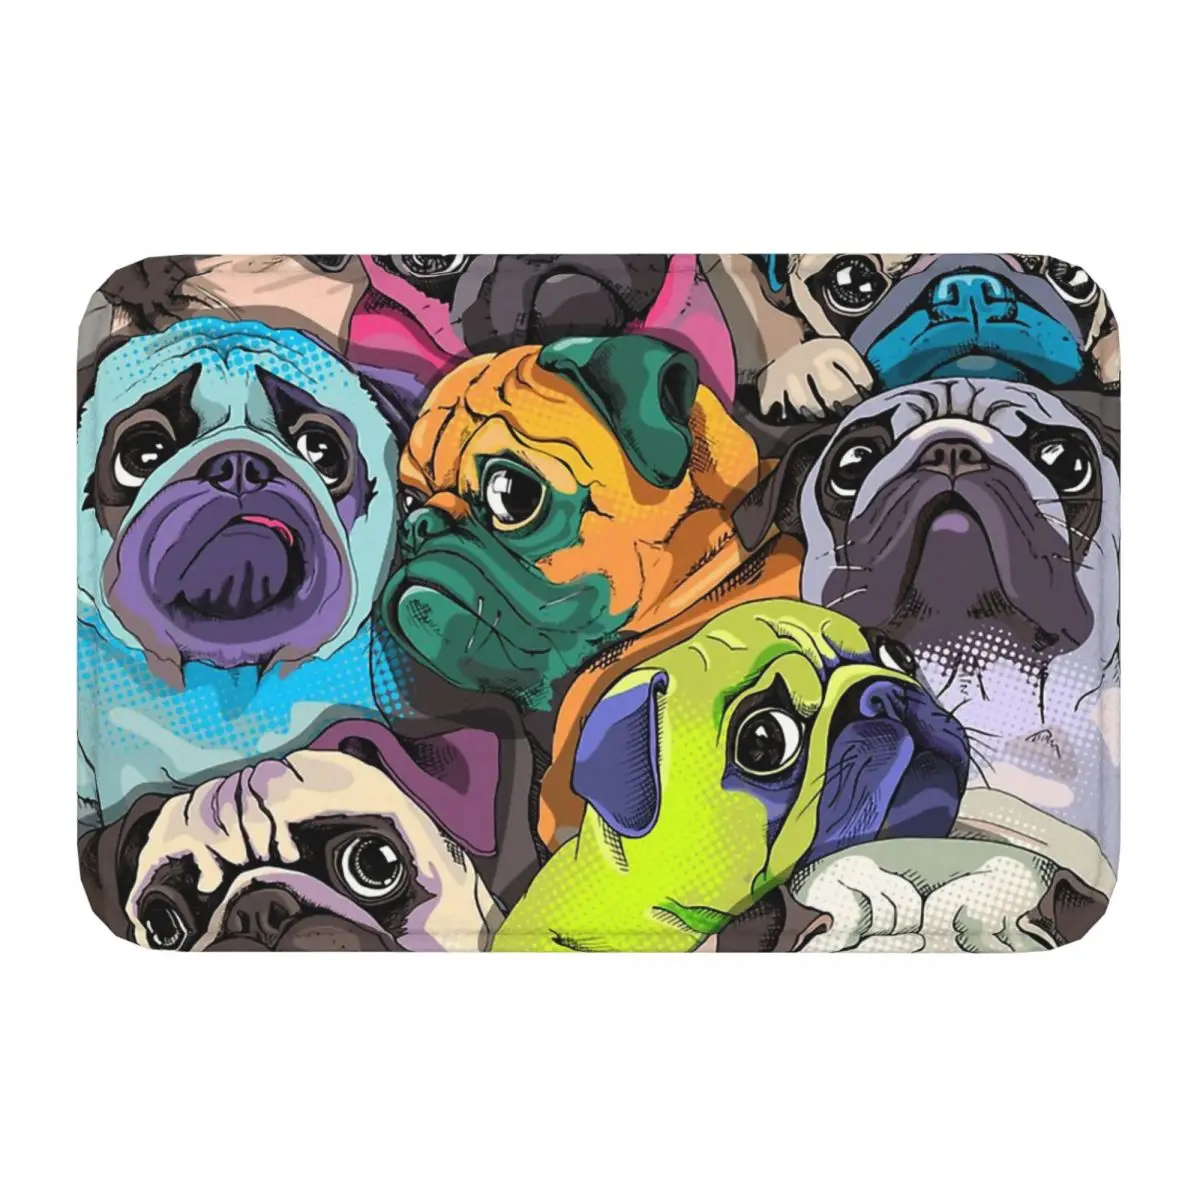 French Bulldog Bath Non-Slip Carpet Portrait Of Many Pugs Bedroom Mat Welcome Doormat Home Decoration Rug